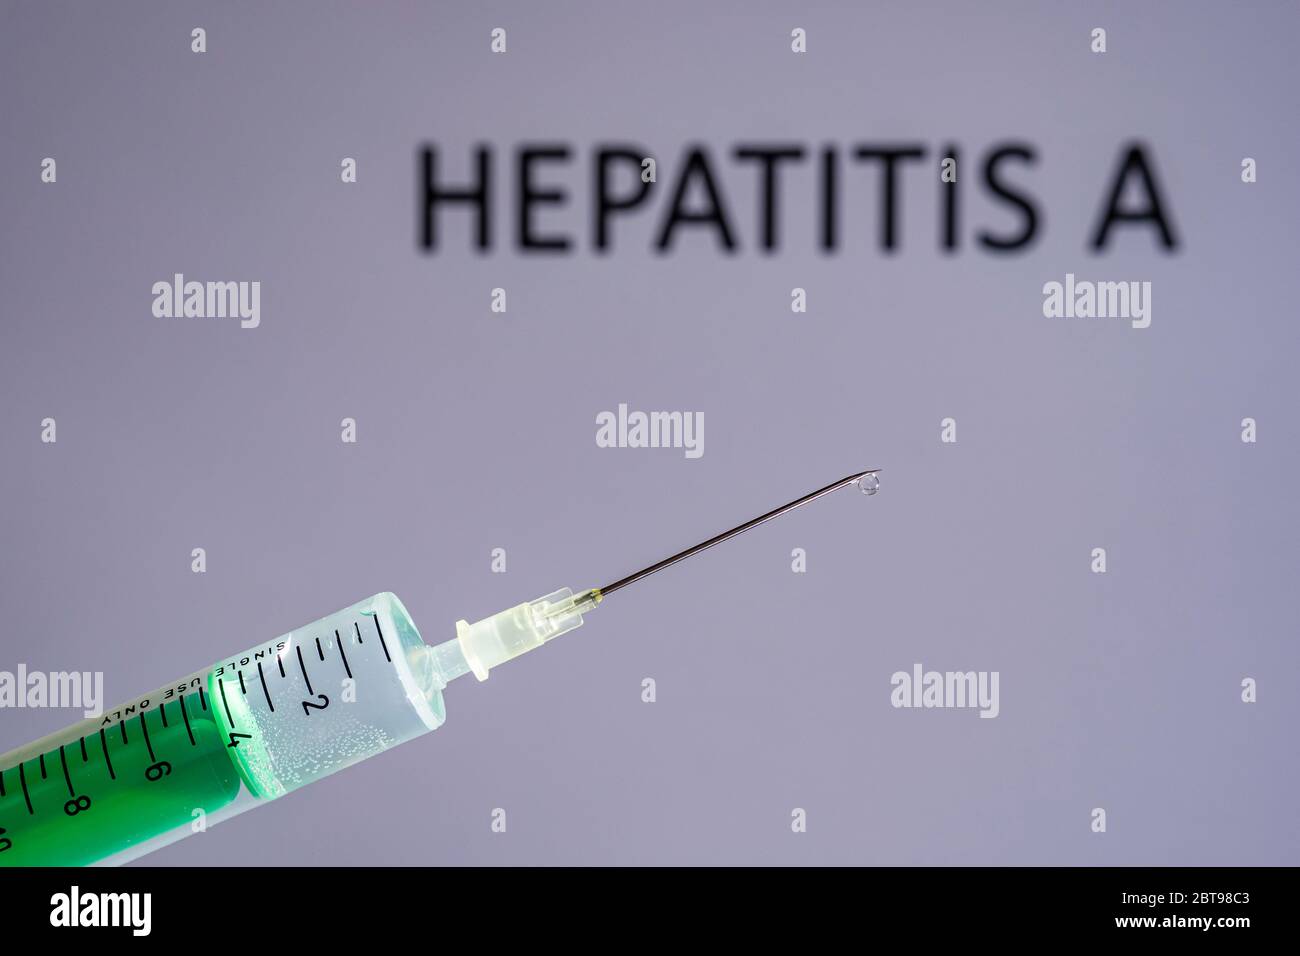 This photo illustration shows a disposable syringe with hypodermic needle, HEPATITIS A written on a grey board behind Stock Photo